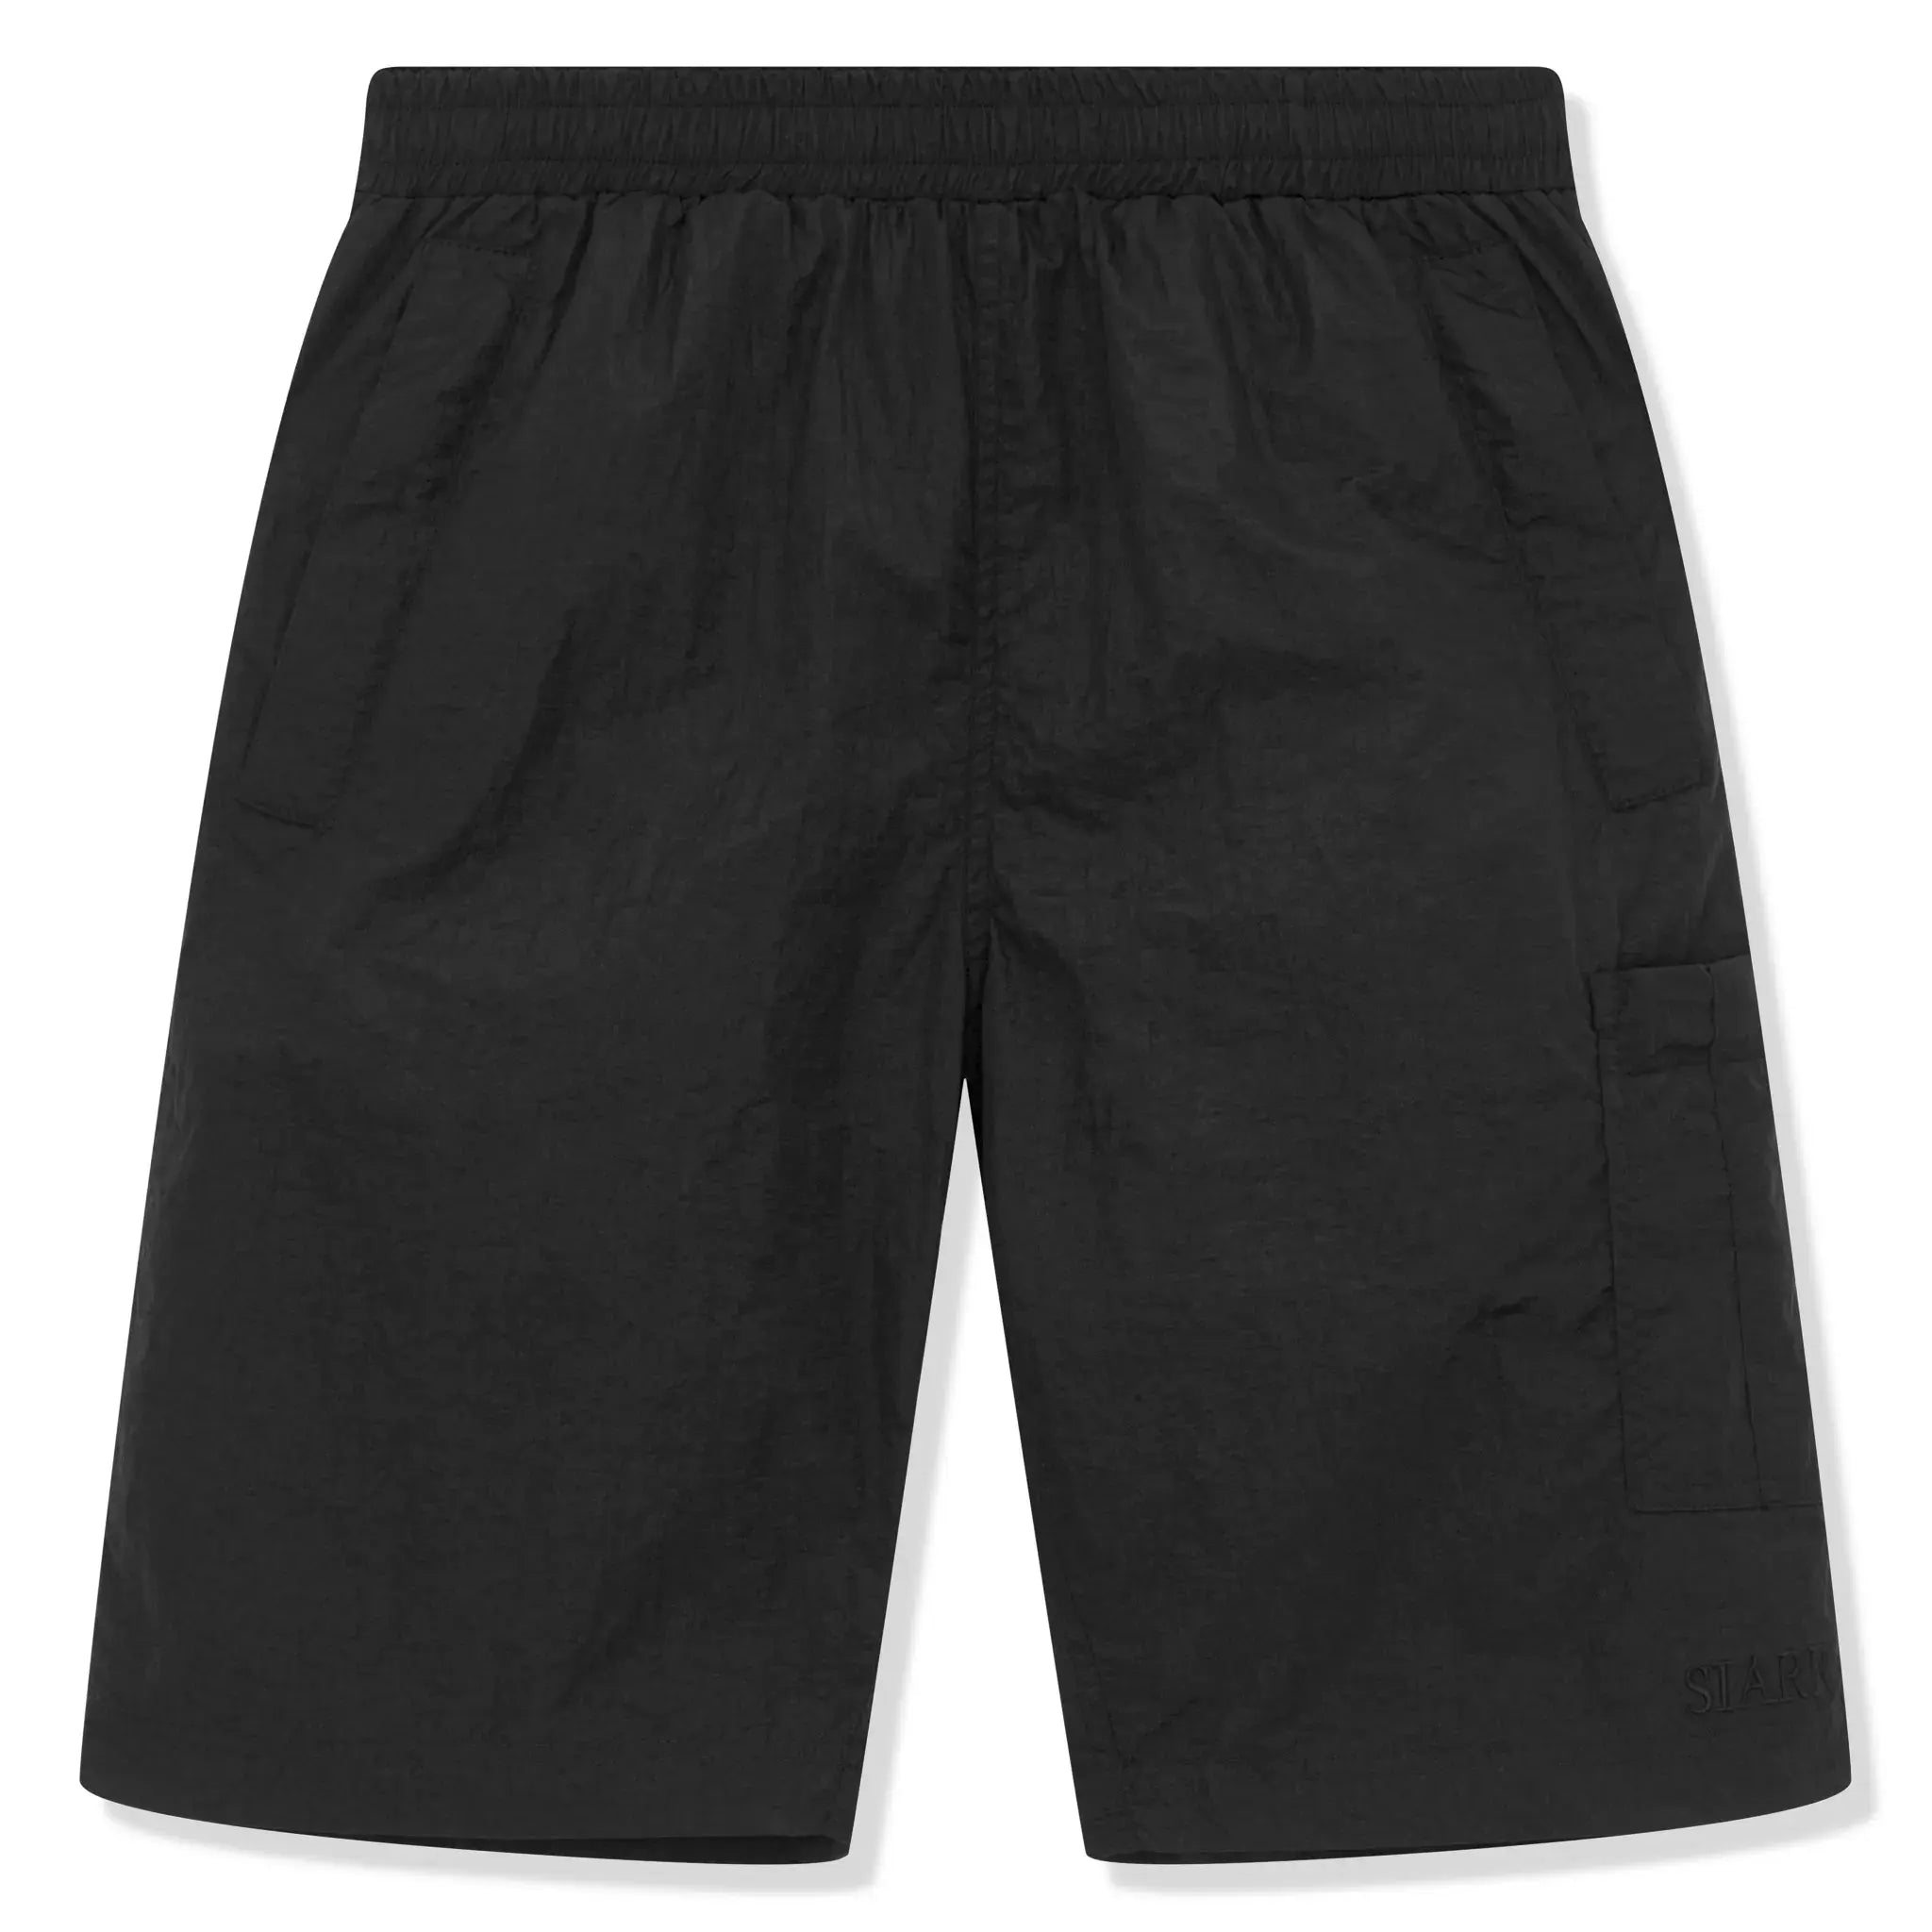 Front view of SIARR Crinkle Black Shorts